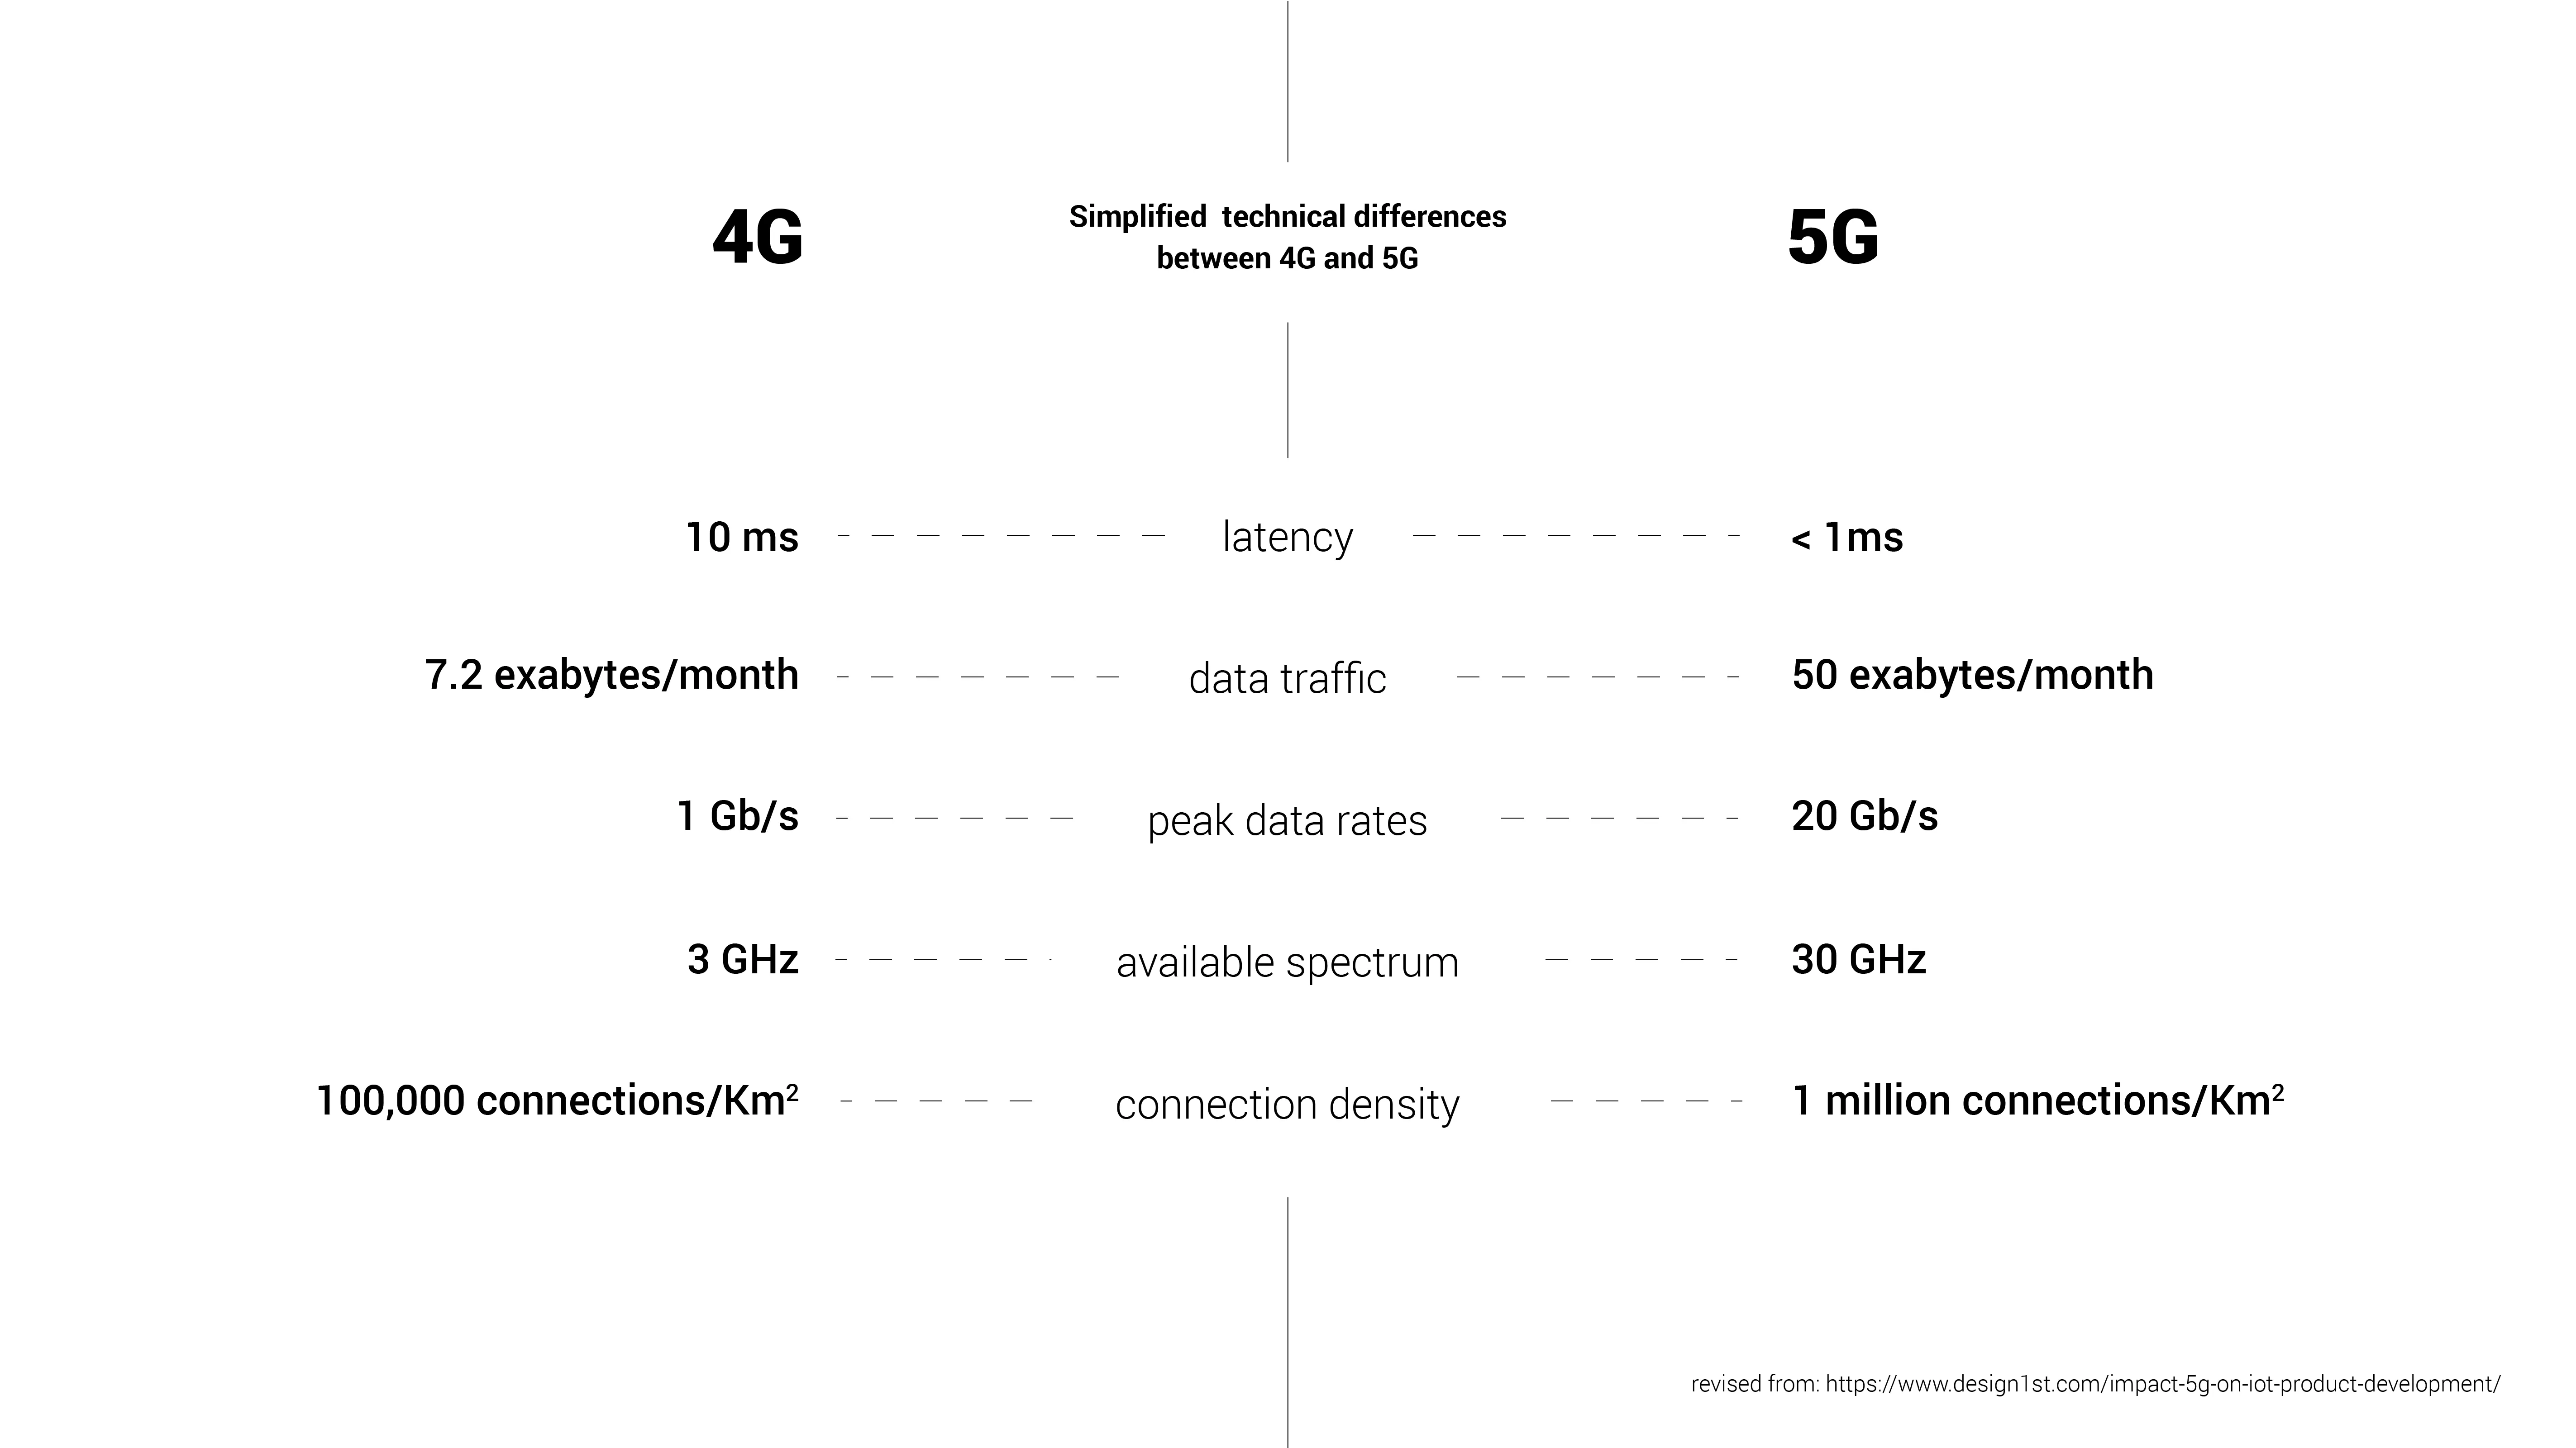 Technical differences between 4G and 5G. 5G outperforms former generation in every key indexes, including latency, data traffic, peak data rates, available spectrum and connection density.